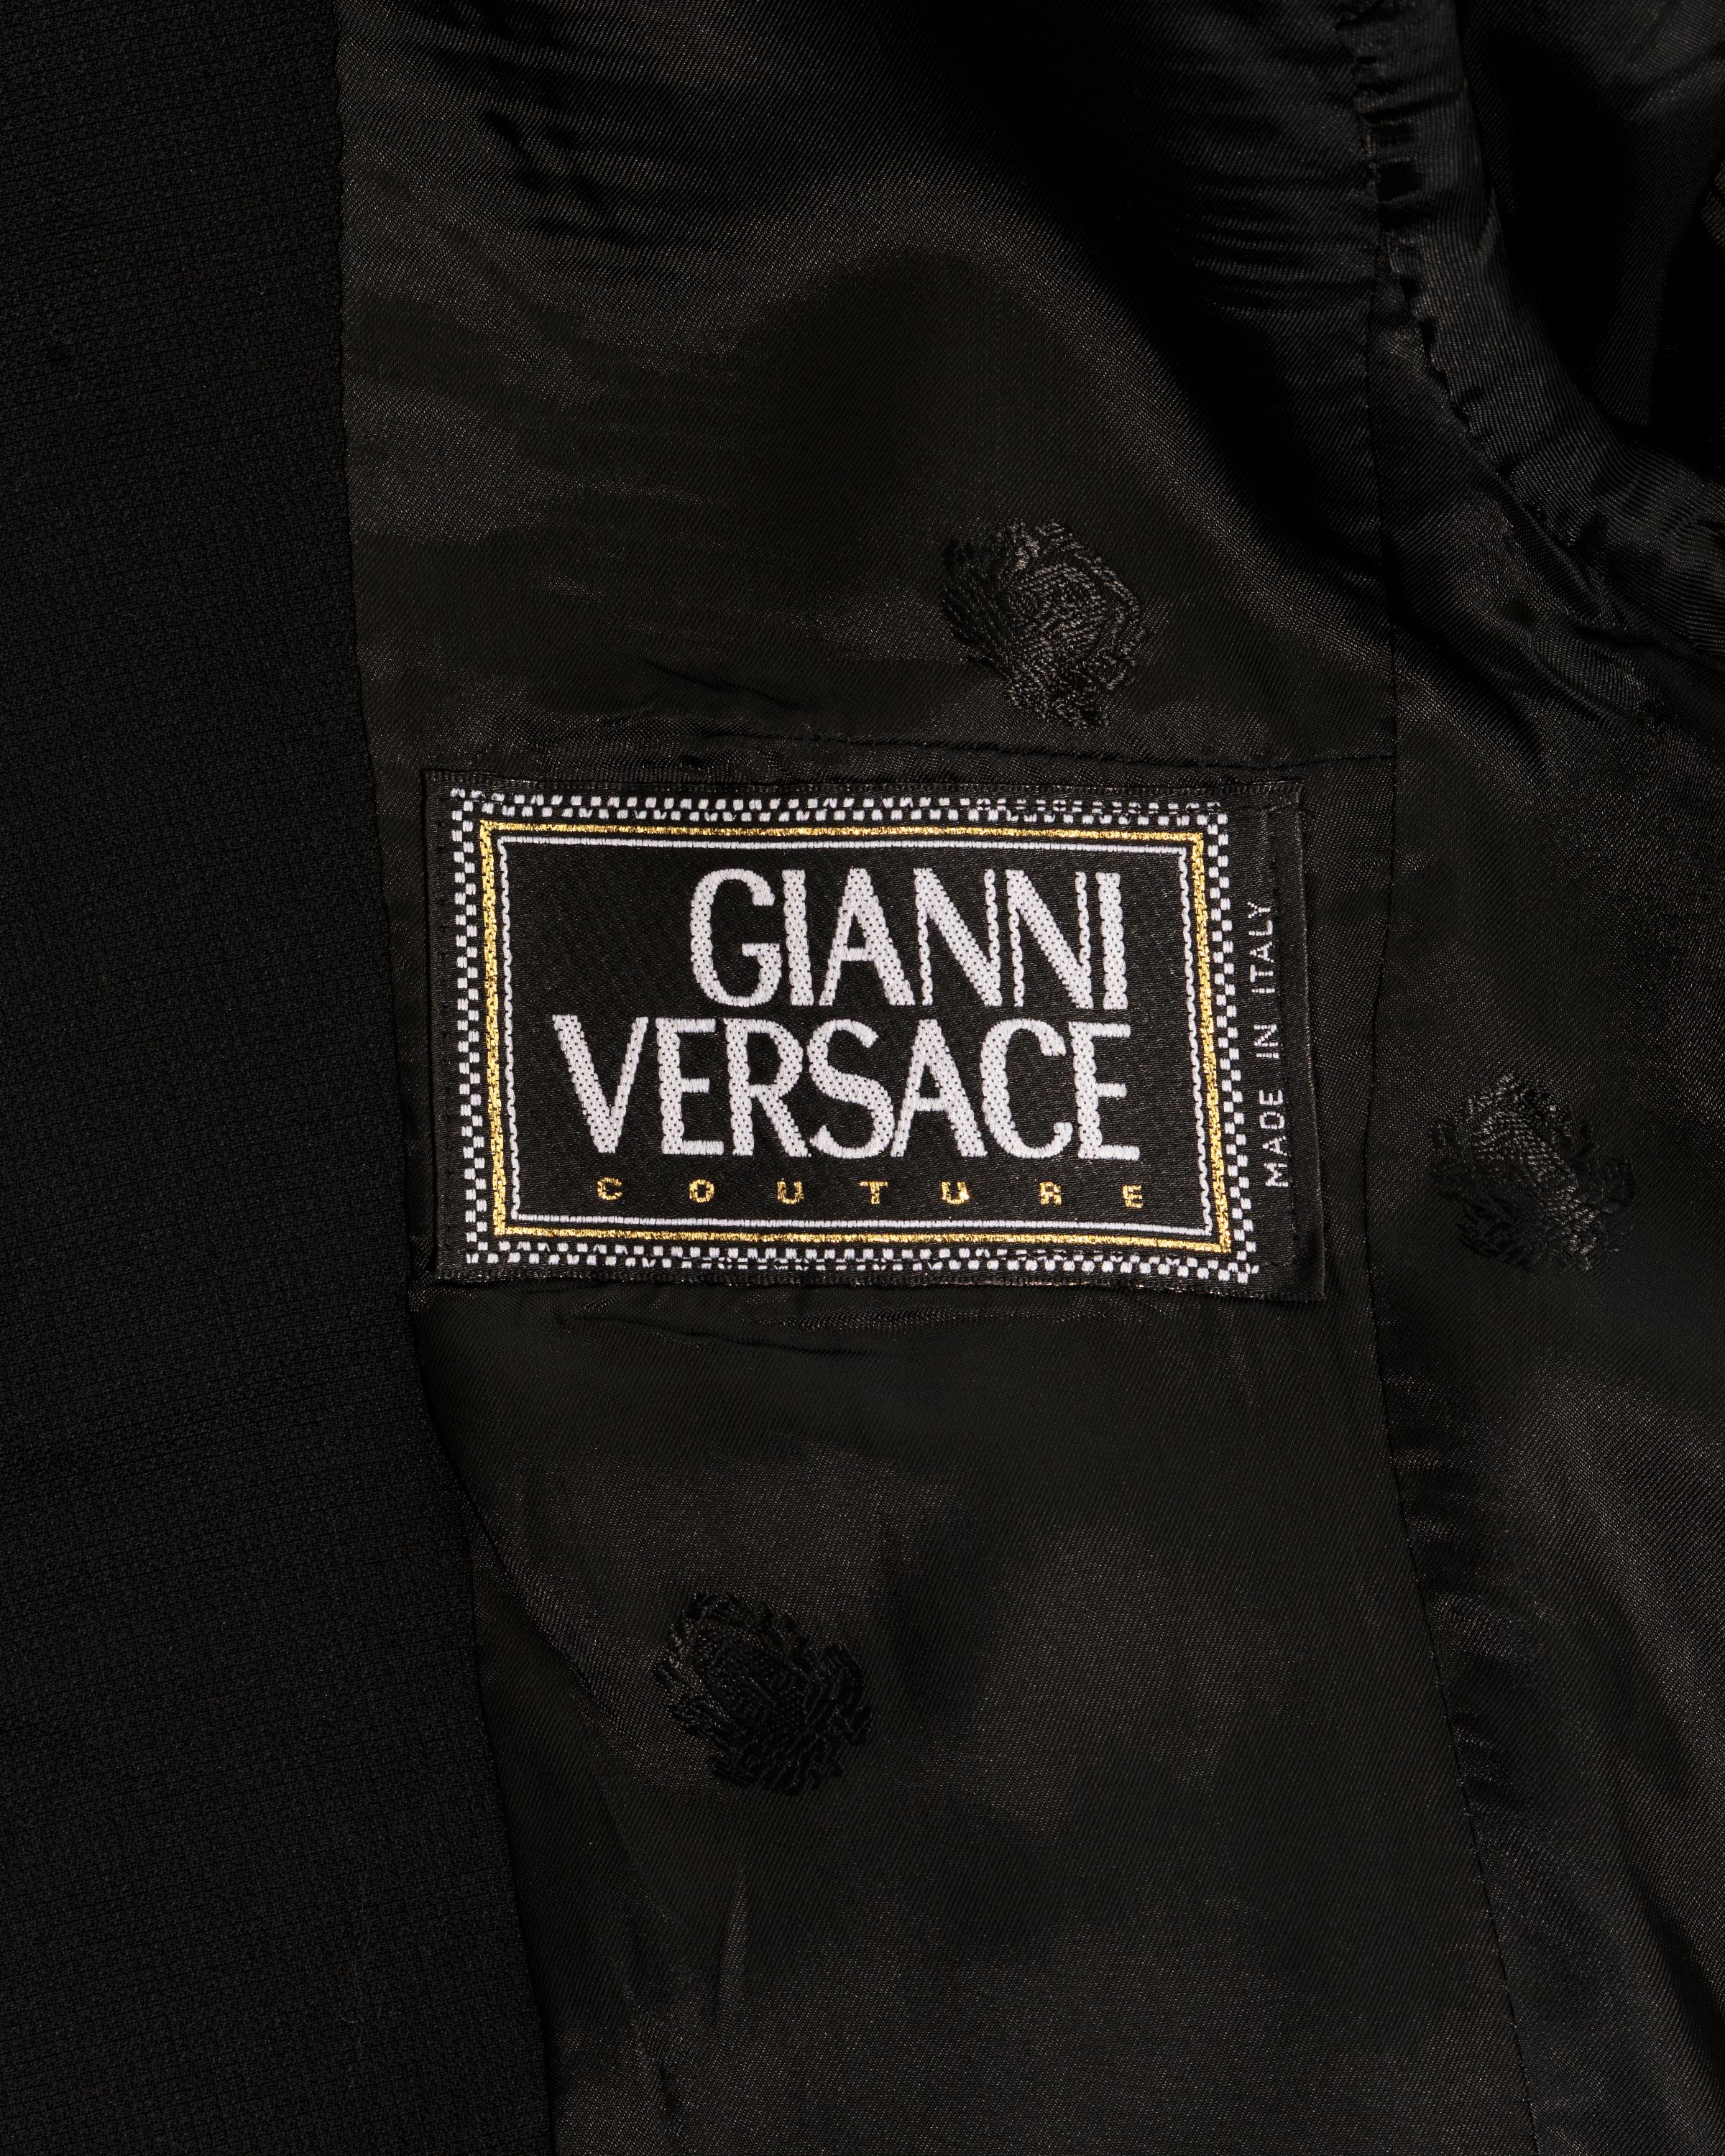 Women's Gianni Versace black wool pant suit with mesh inserts, ss 1998